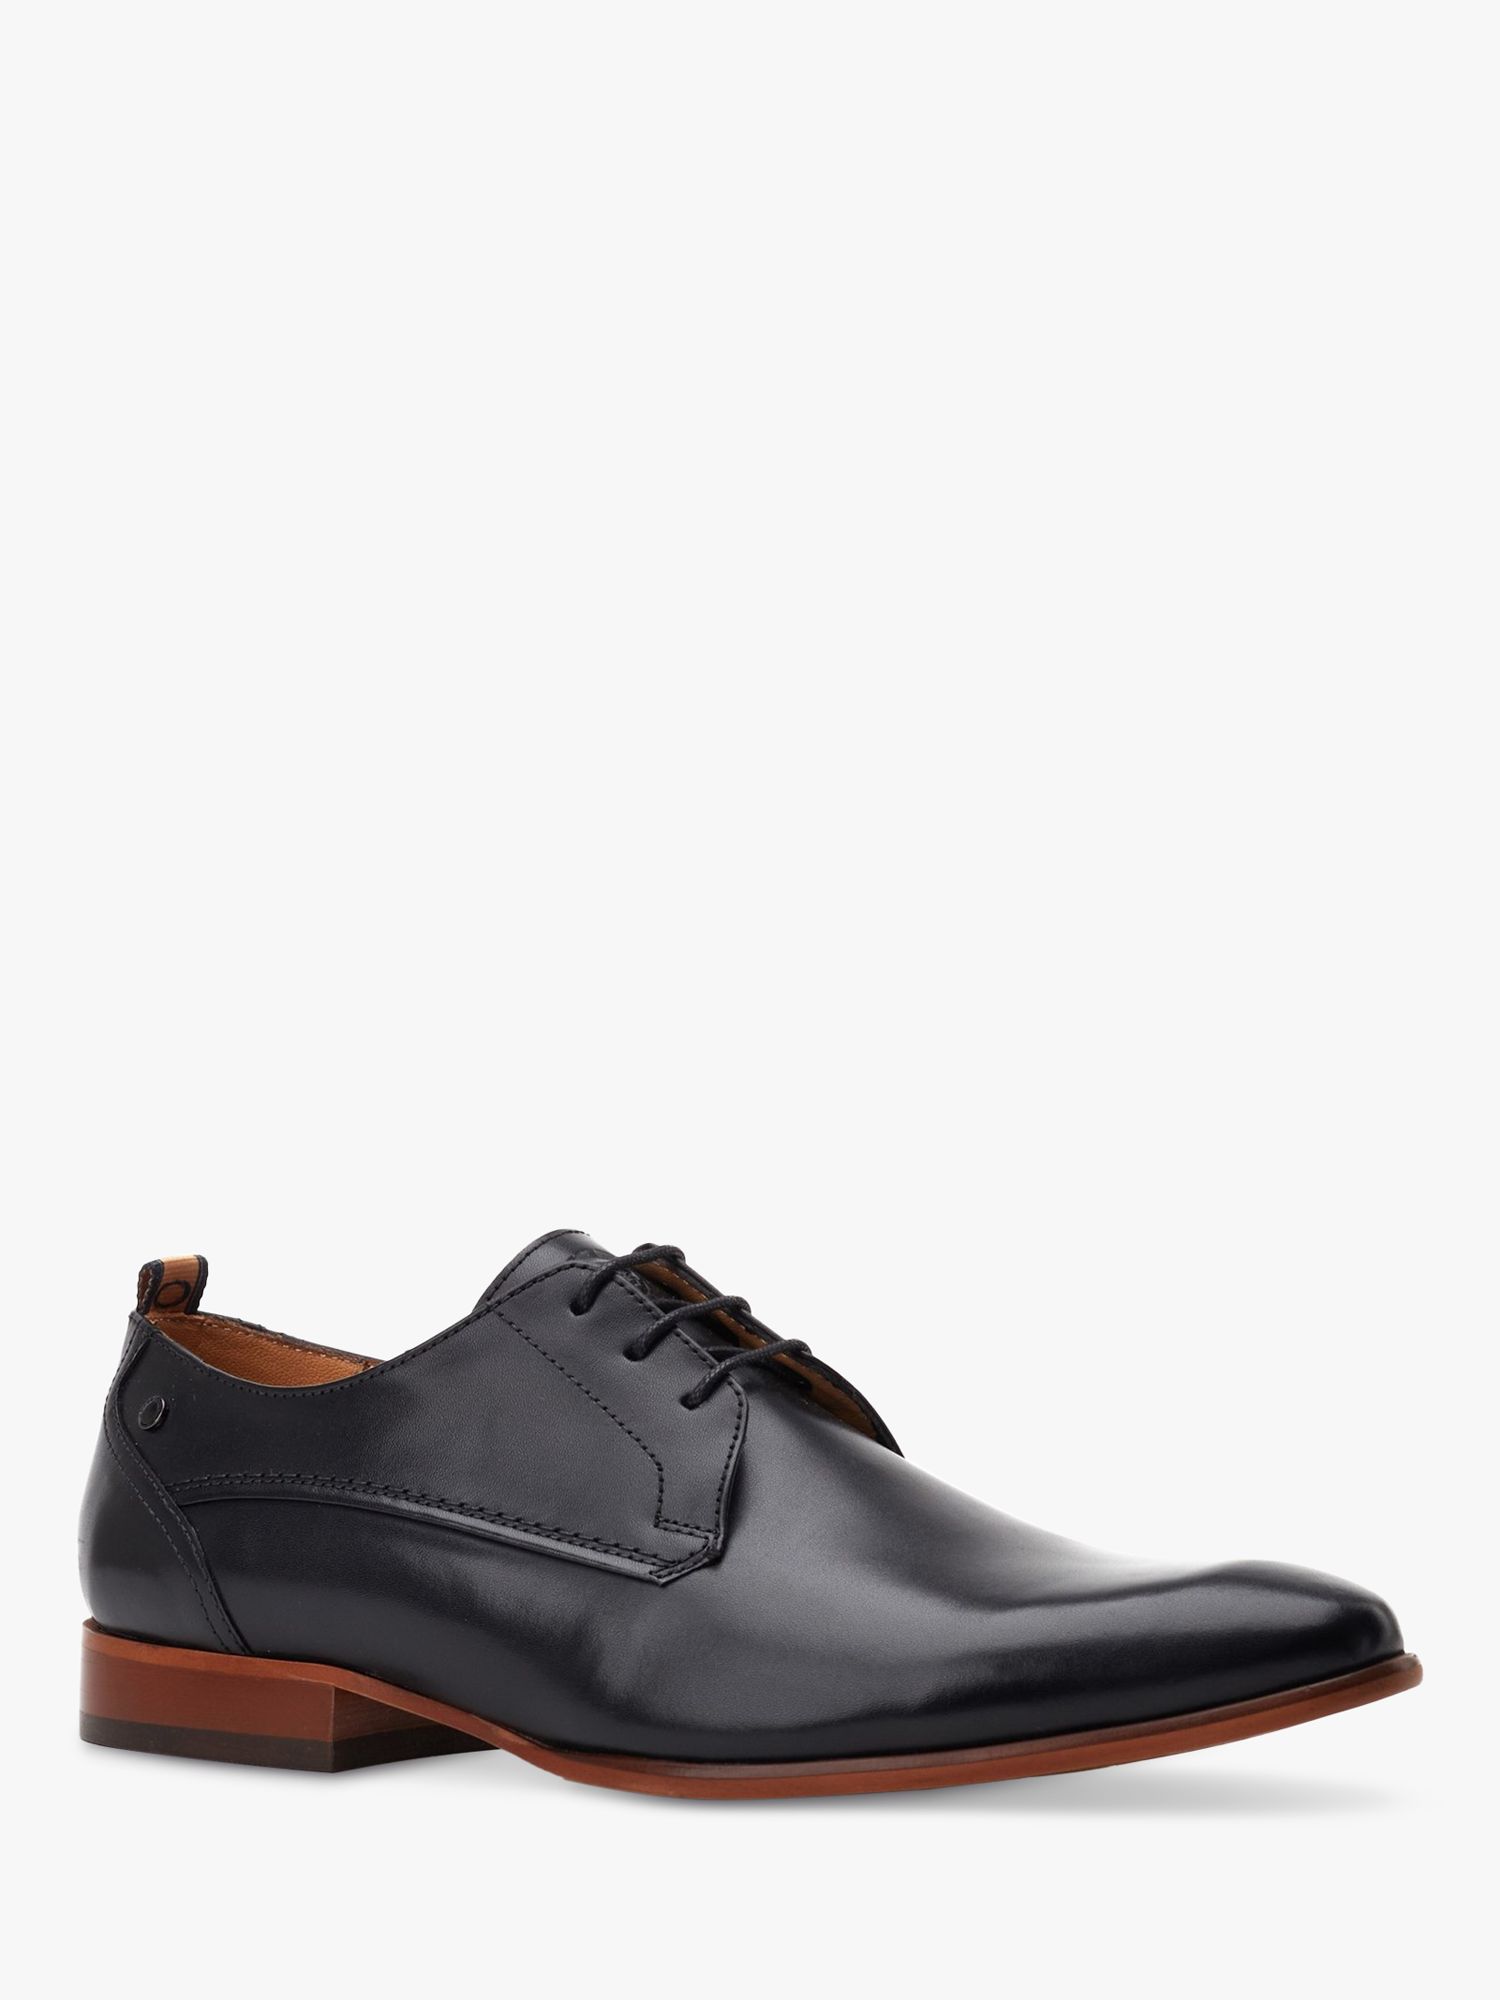 Base London Gambino Lace Up Leather Derby Shoes, Black, 7